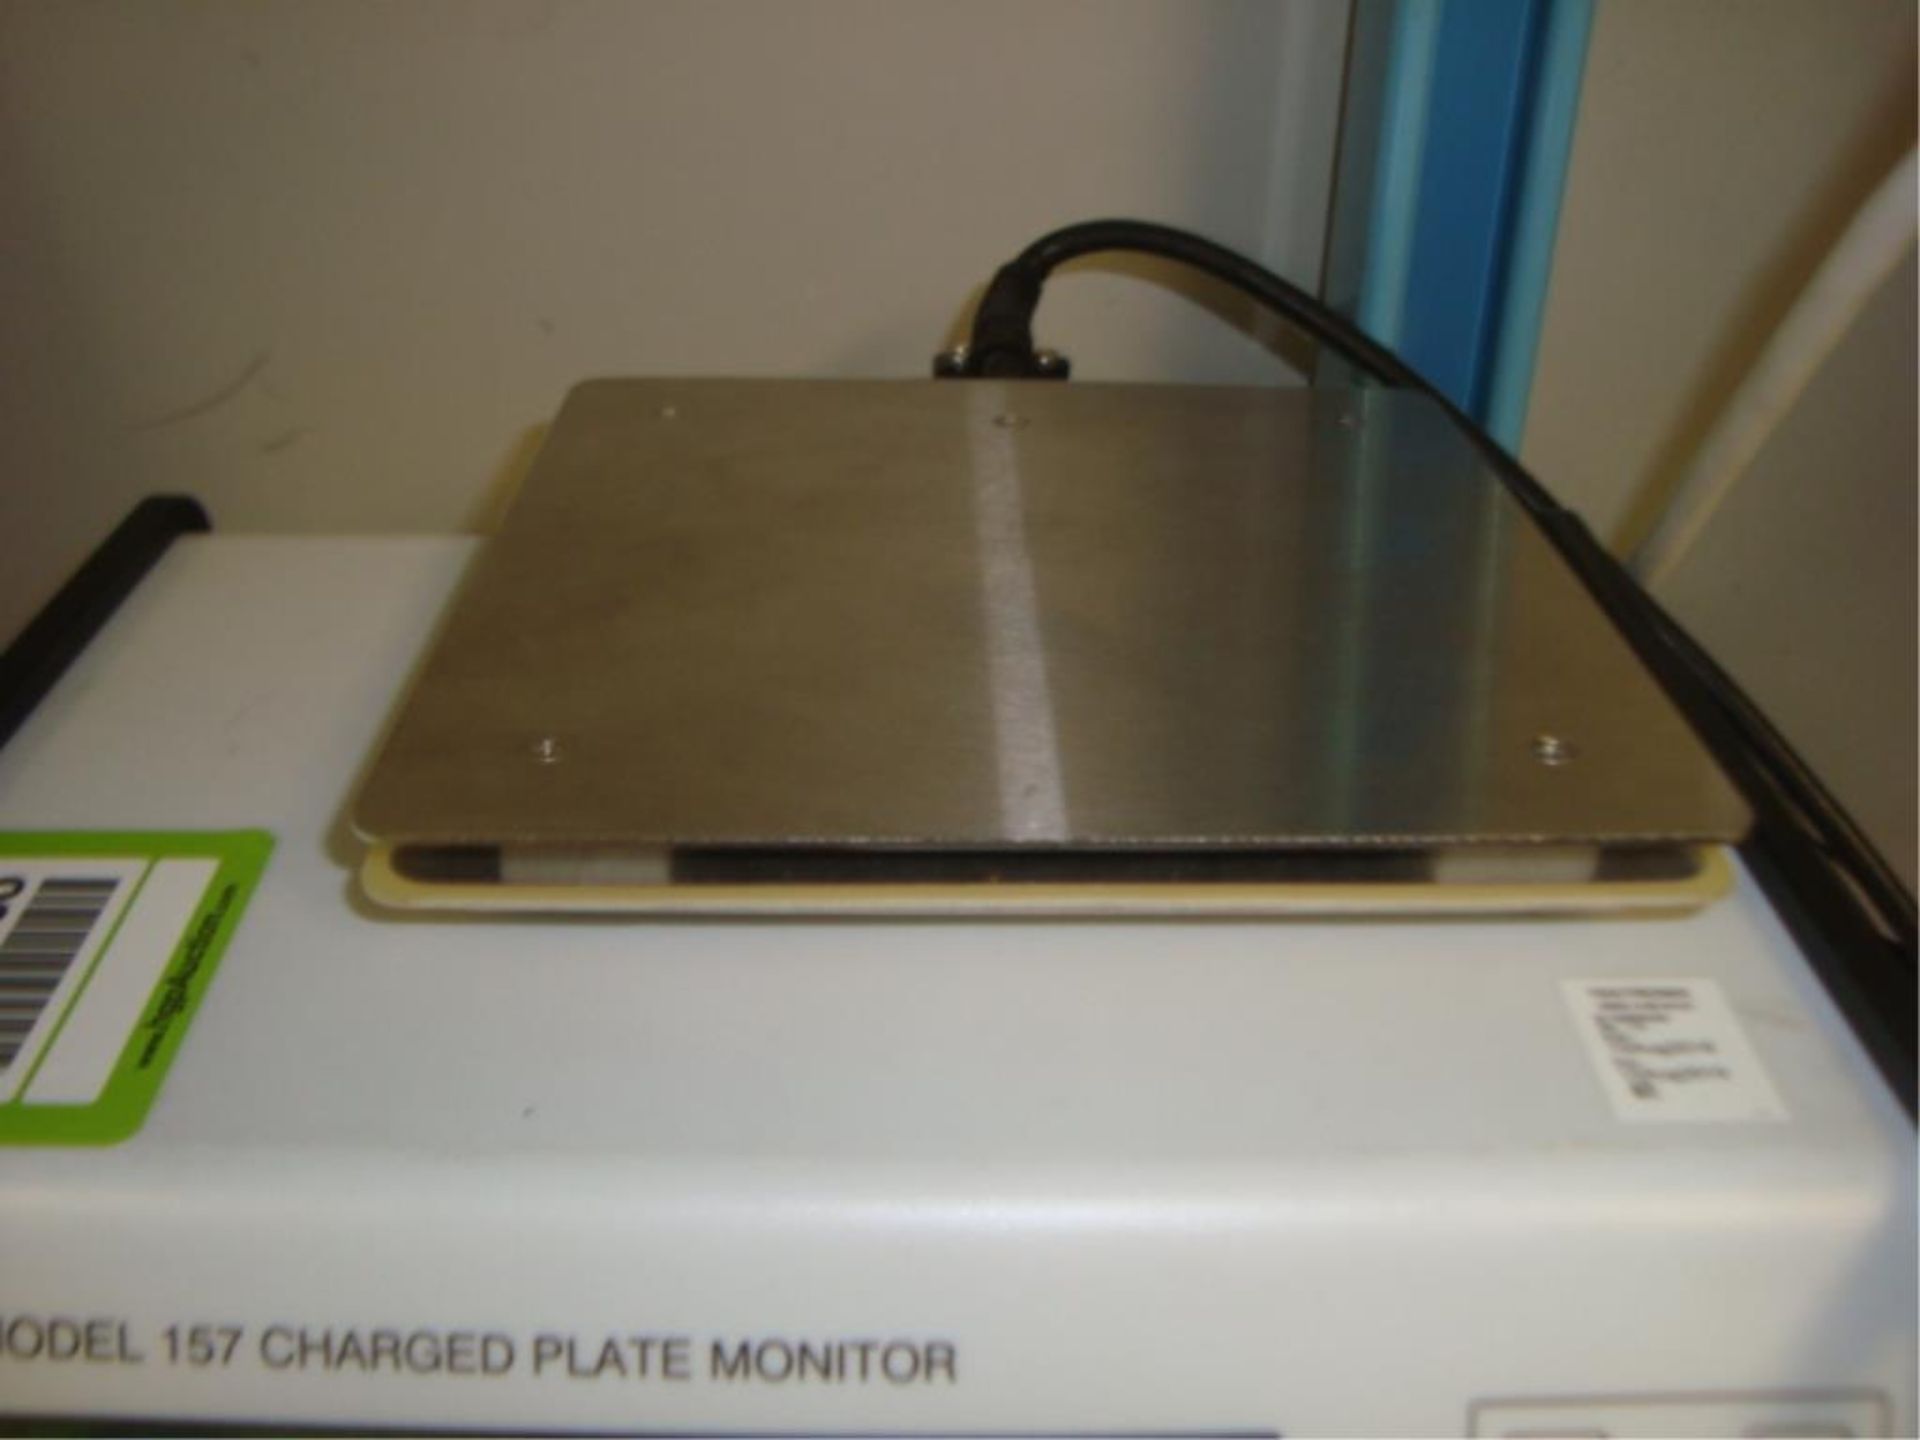 Charged Plate Monitor - Image 4 of 6